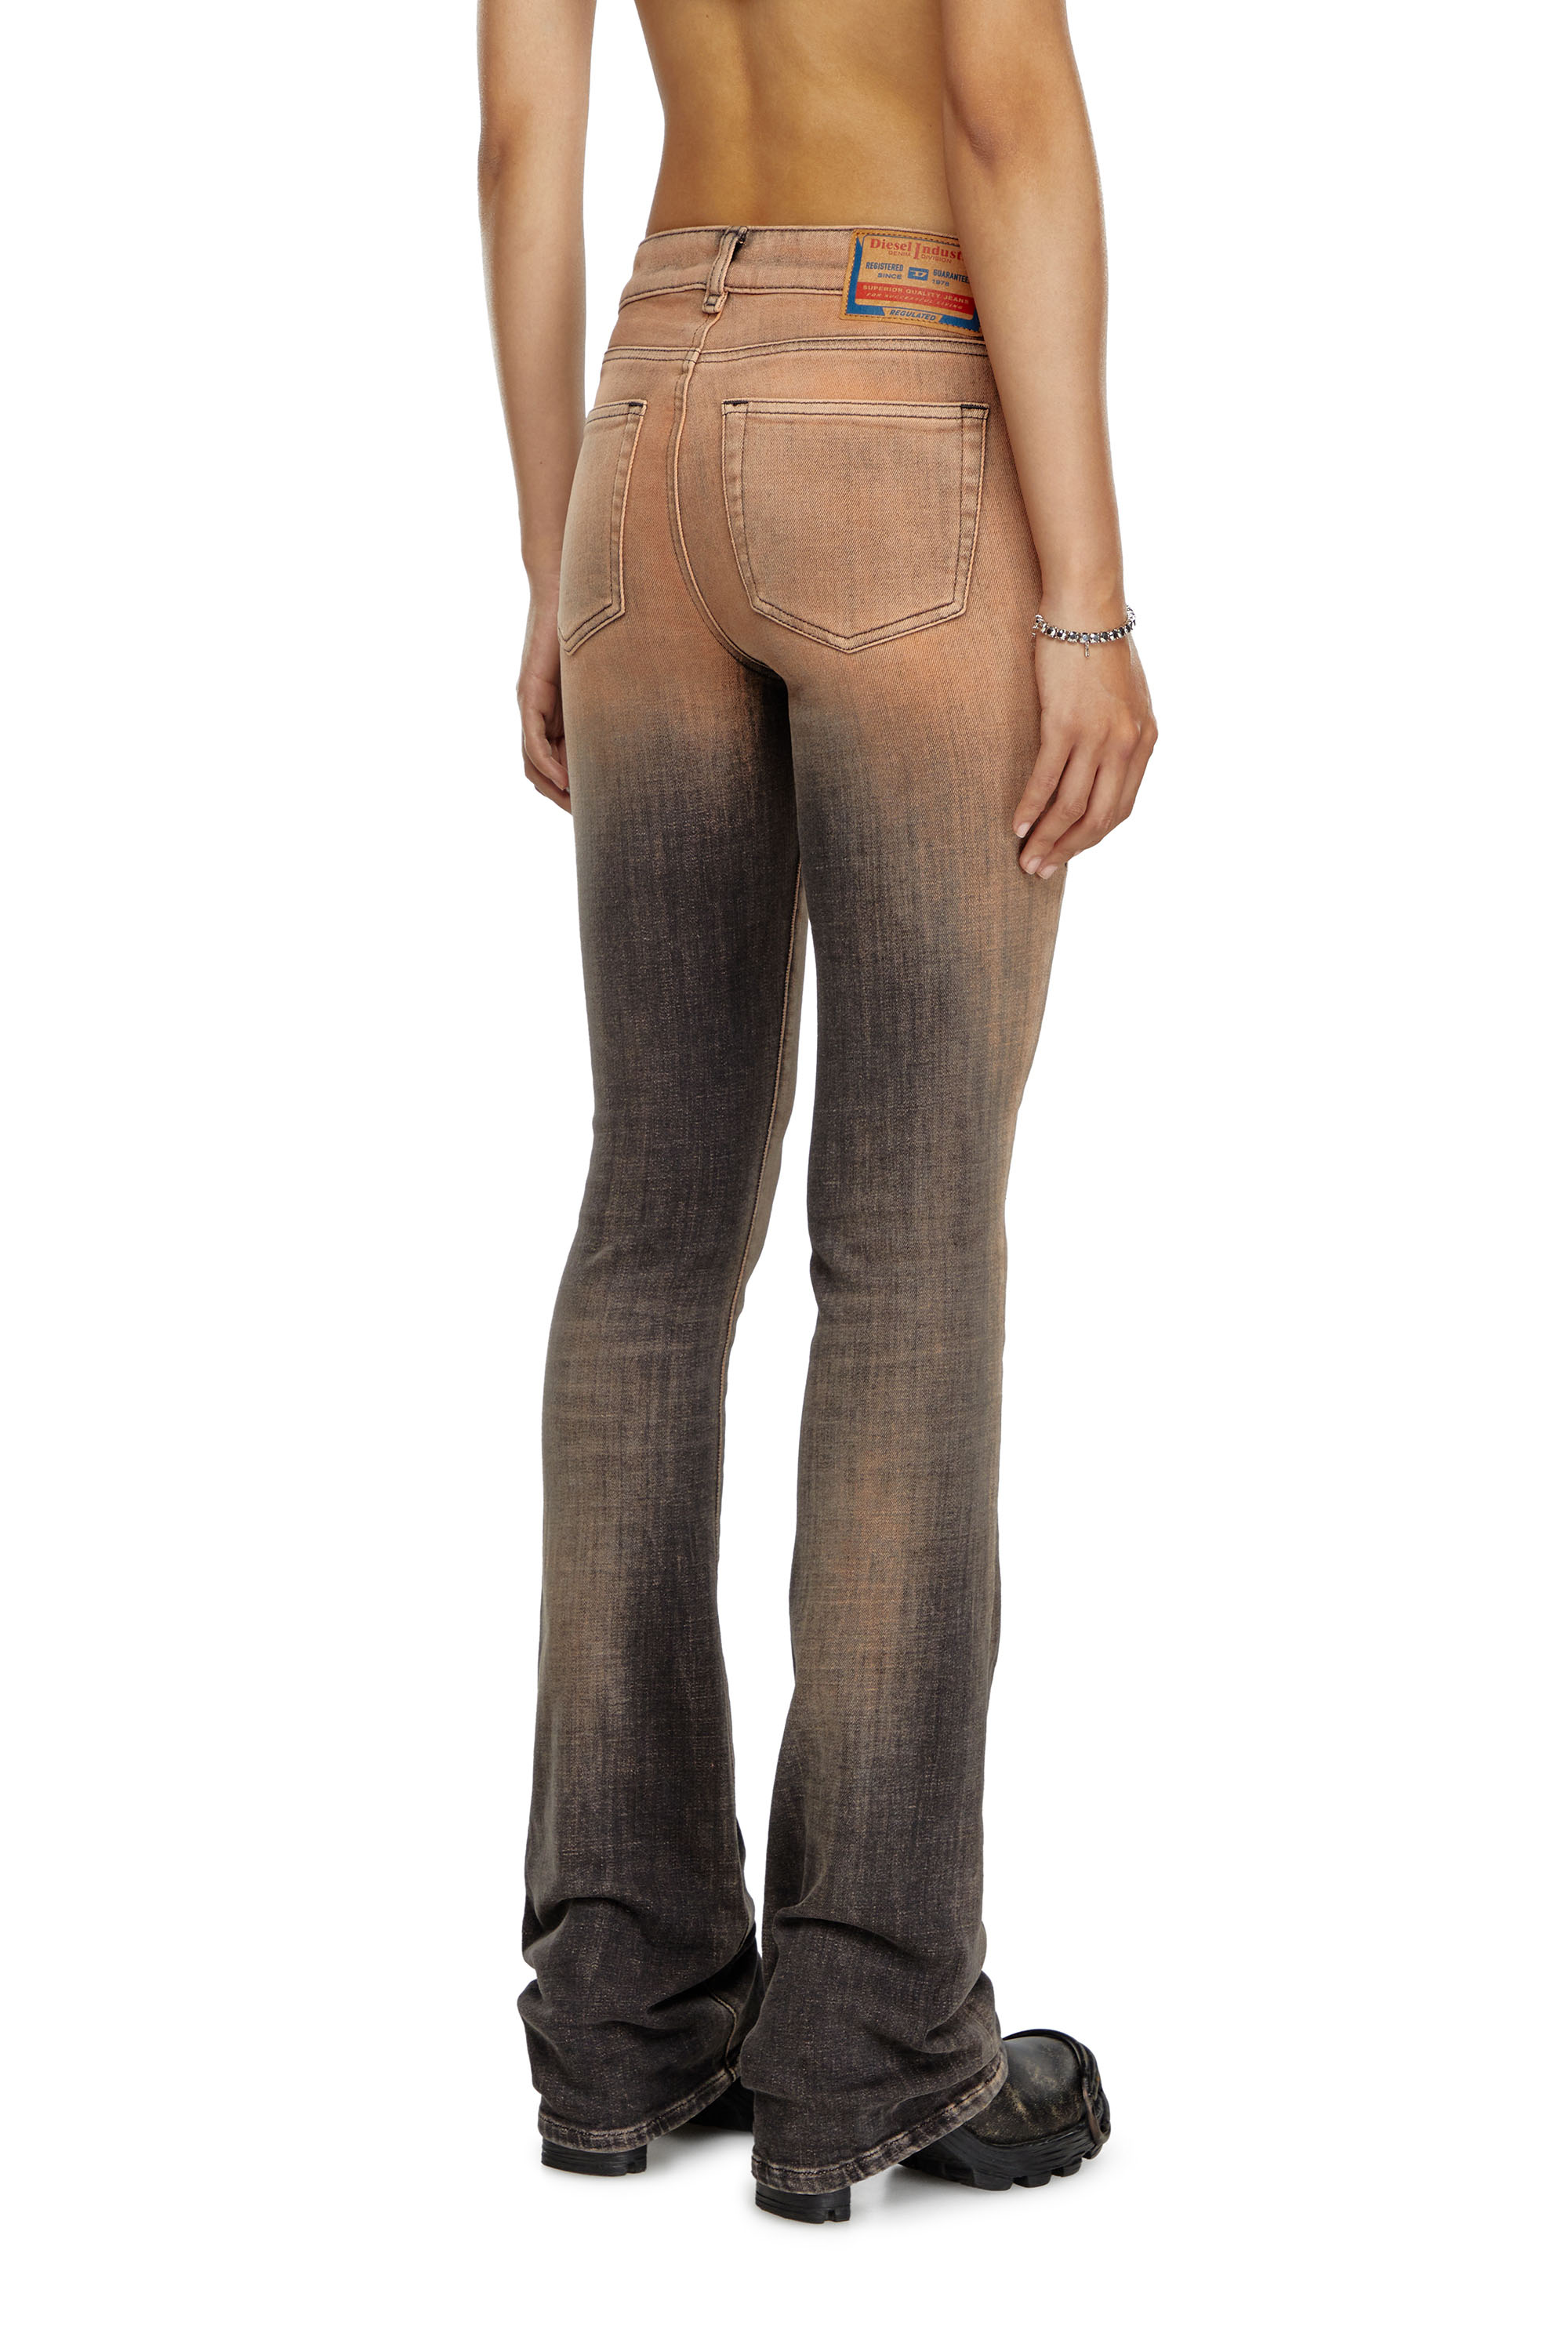 Diesel - Bootcut and Flare Jeans 1969 D-Ebbey 09K12, Mujer Bootcut y Flare Jeans - 1969 D-Ebbey in Multicolor - Image 4